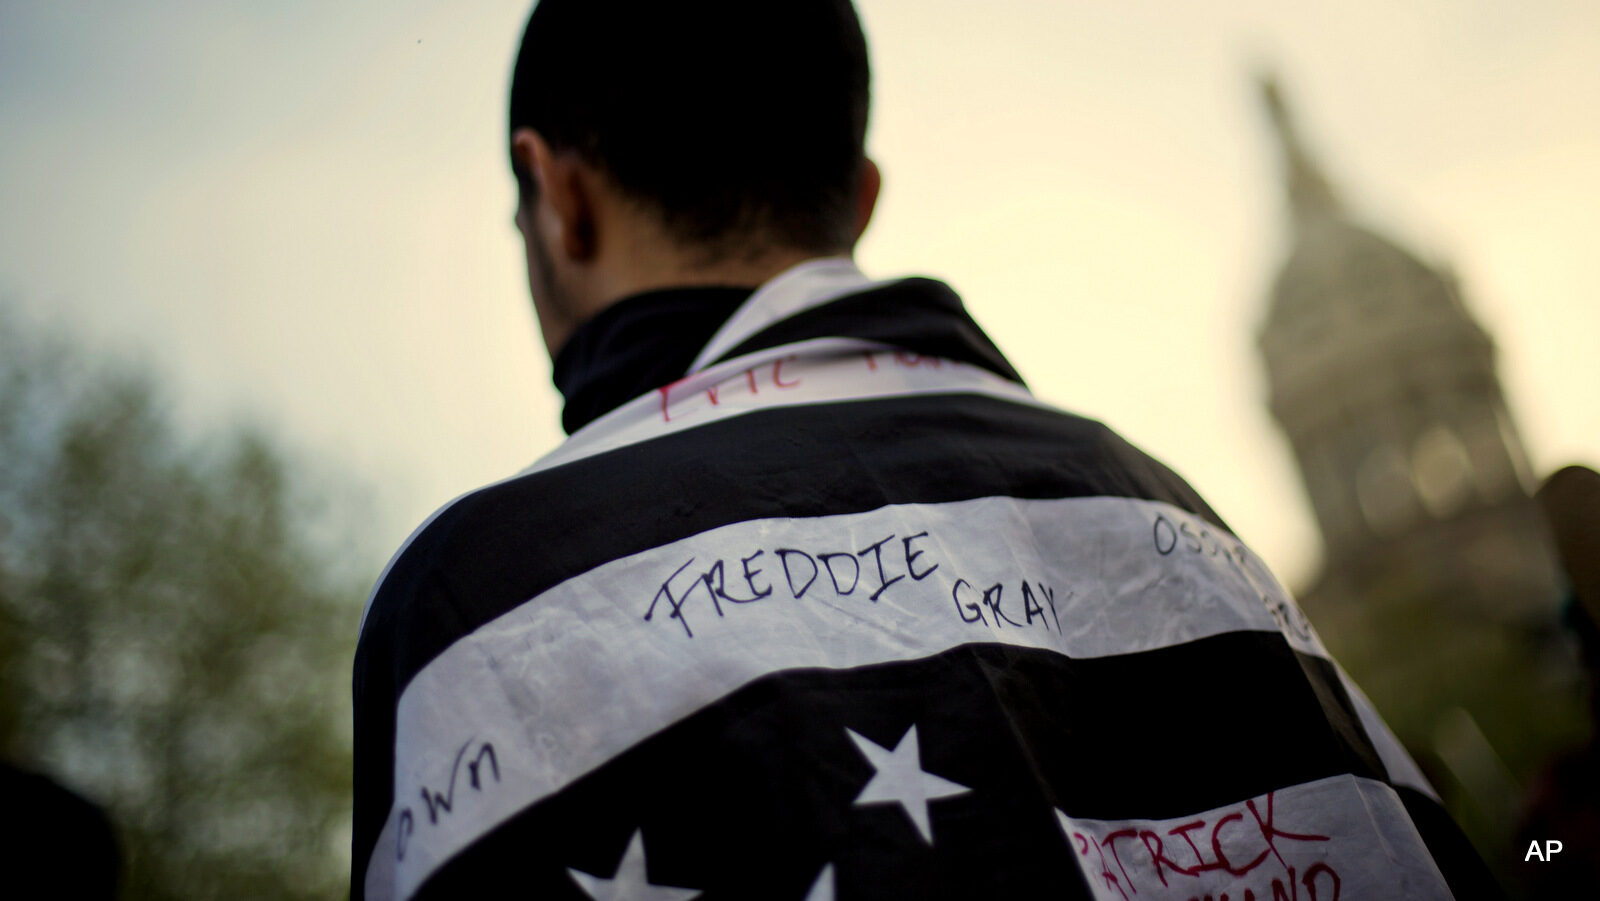 A protestor wears a flag decorated with the name of Freddie Gray during a demonstration outside City Hall, Wednesday, April 29, 2015, in Baltimore.